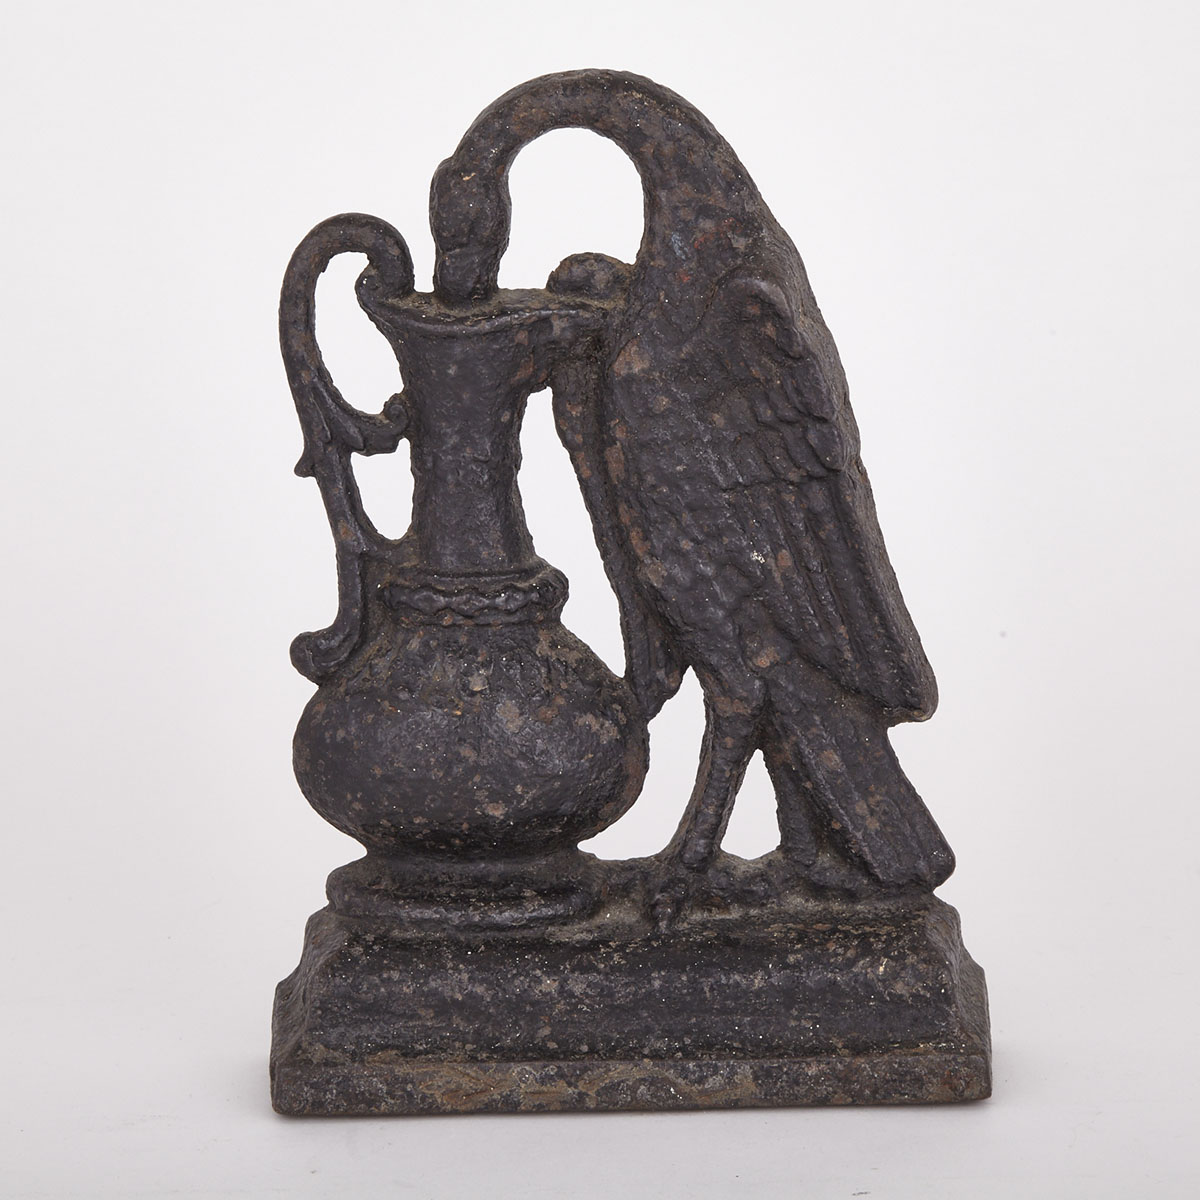 Painted Cast Iron Aesop’s Fable Doorstop, 19th century